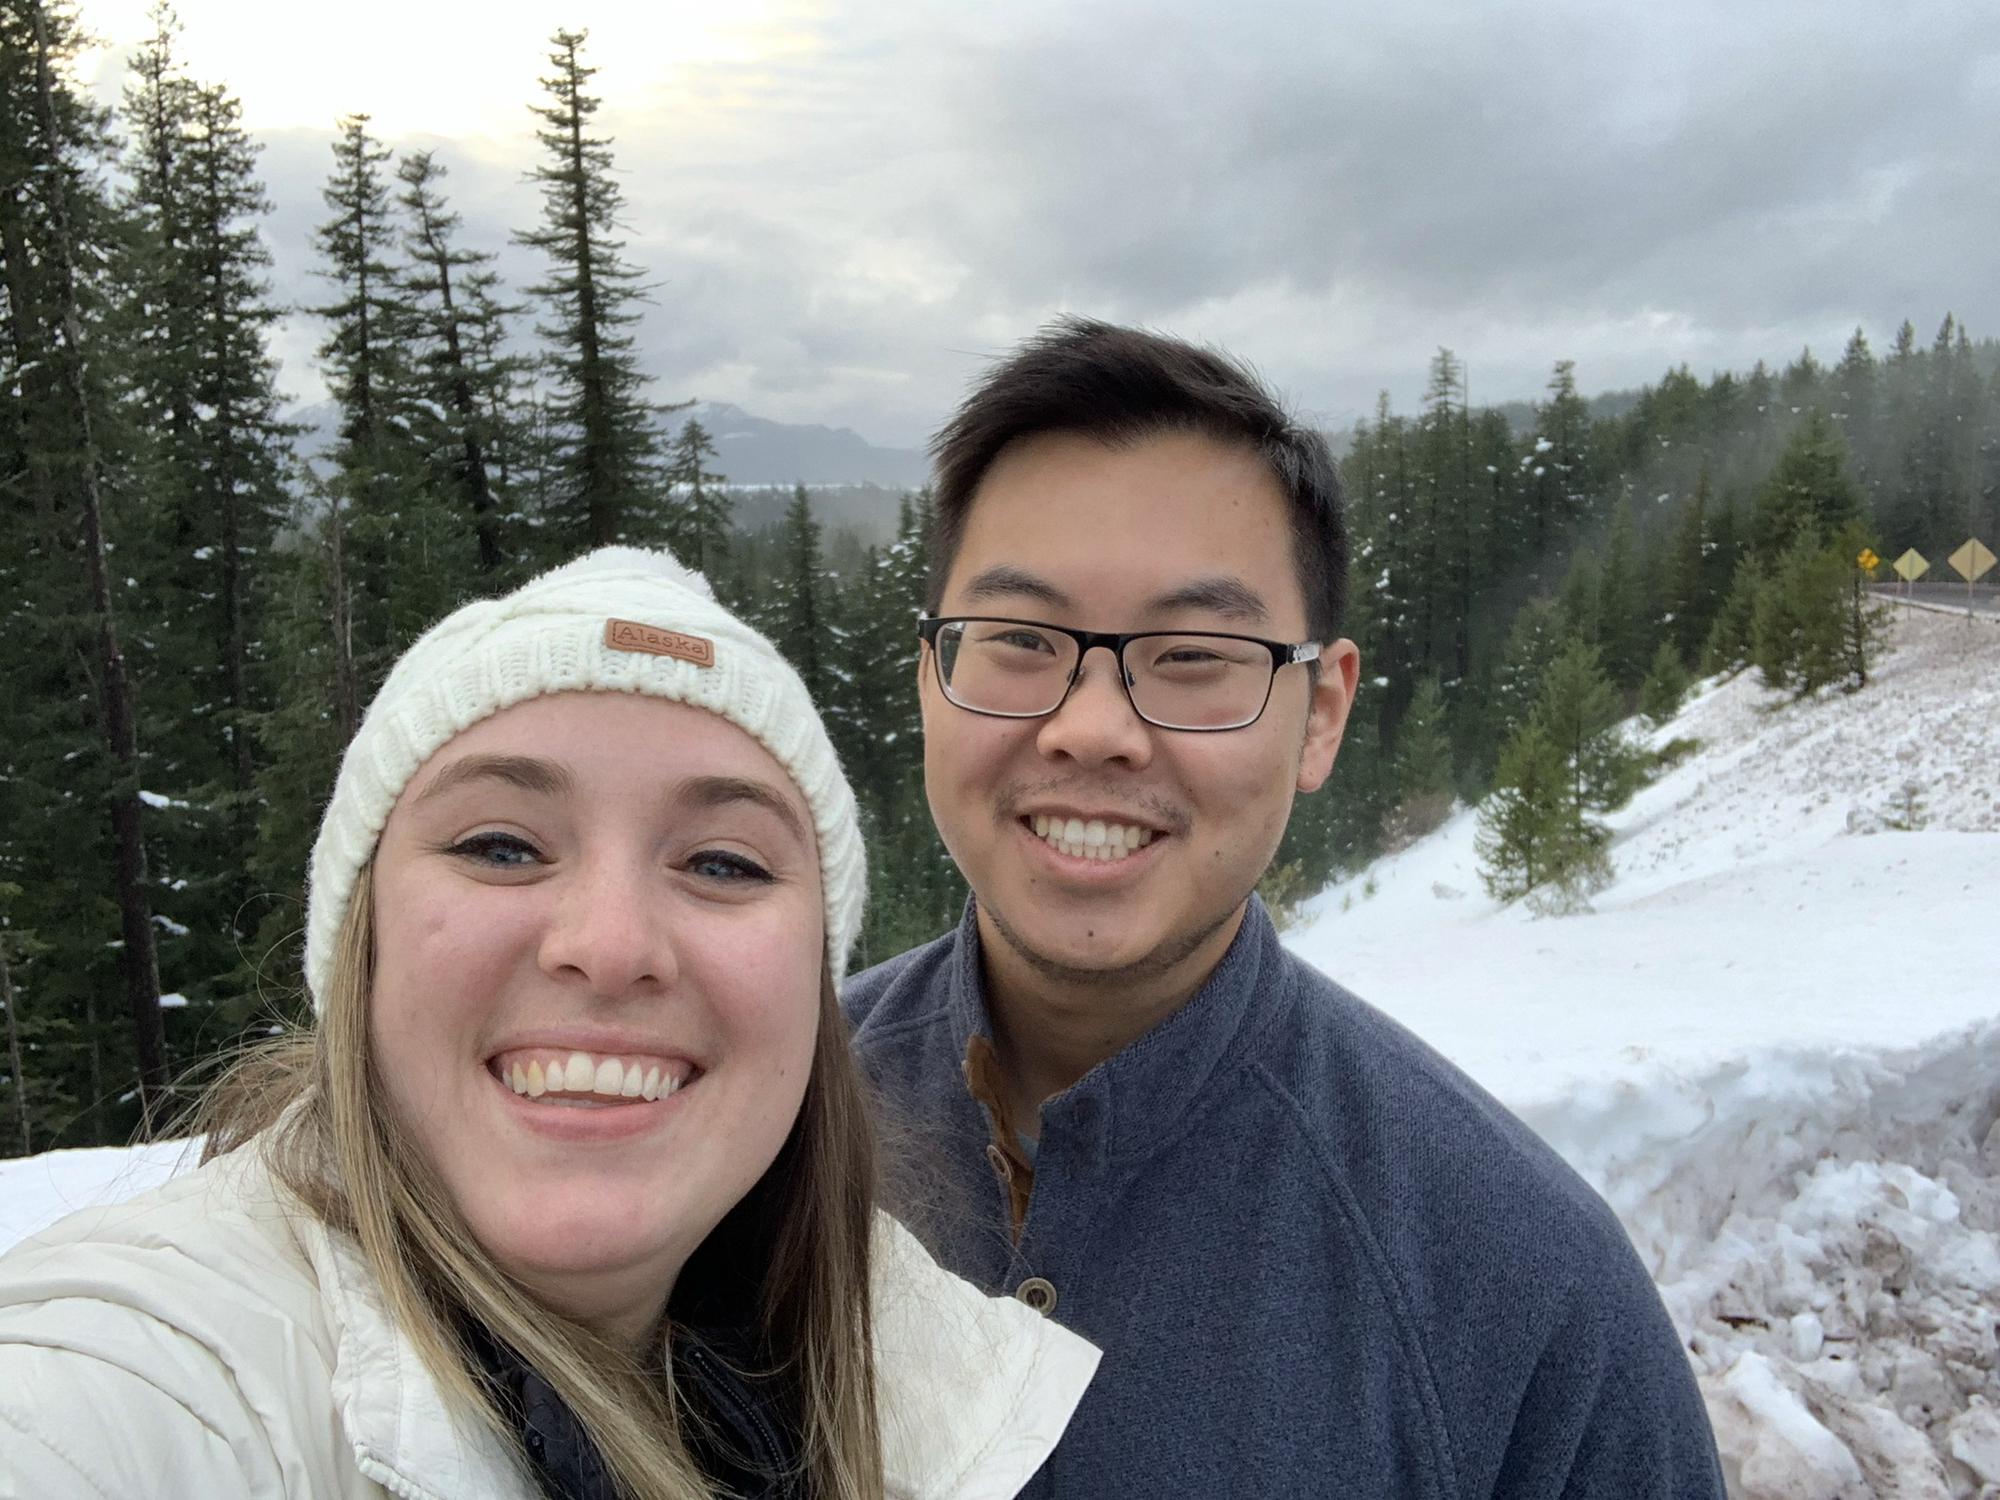 Oregon trip for our 5 year anniversary in 2020